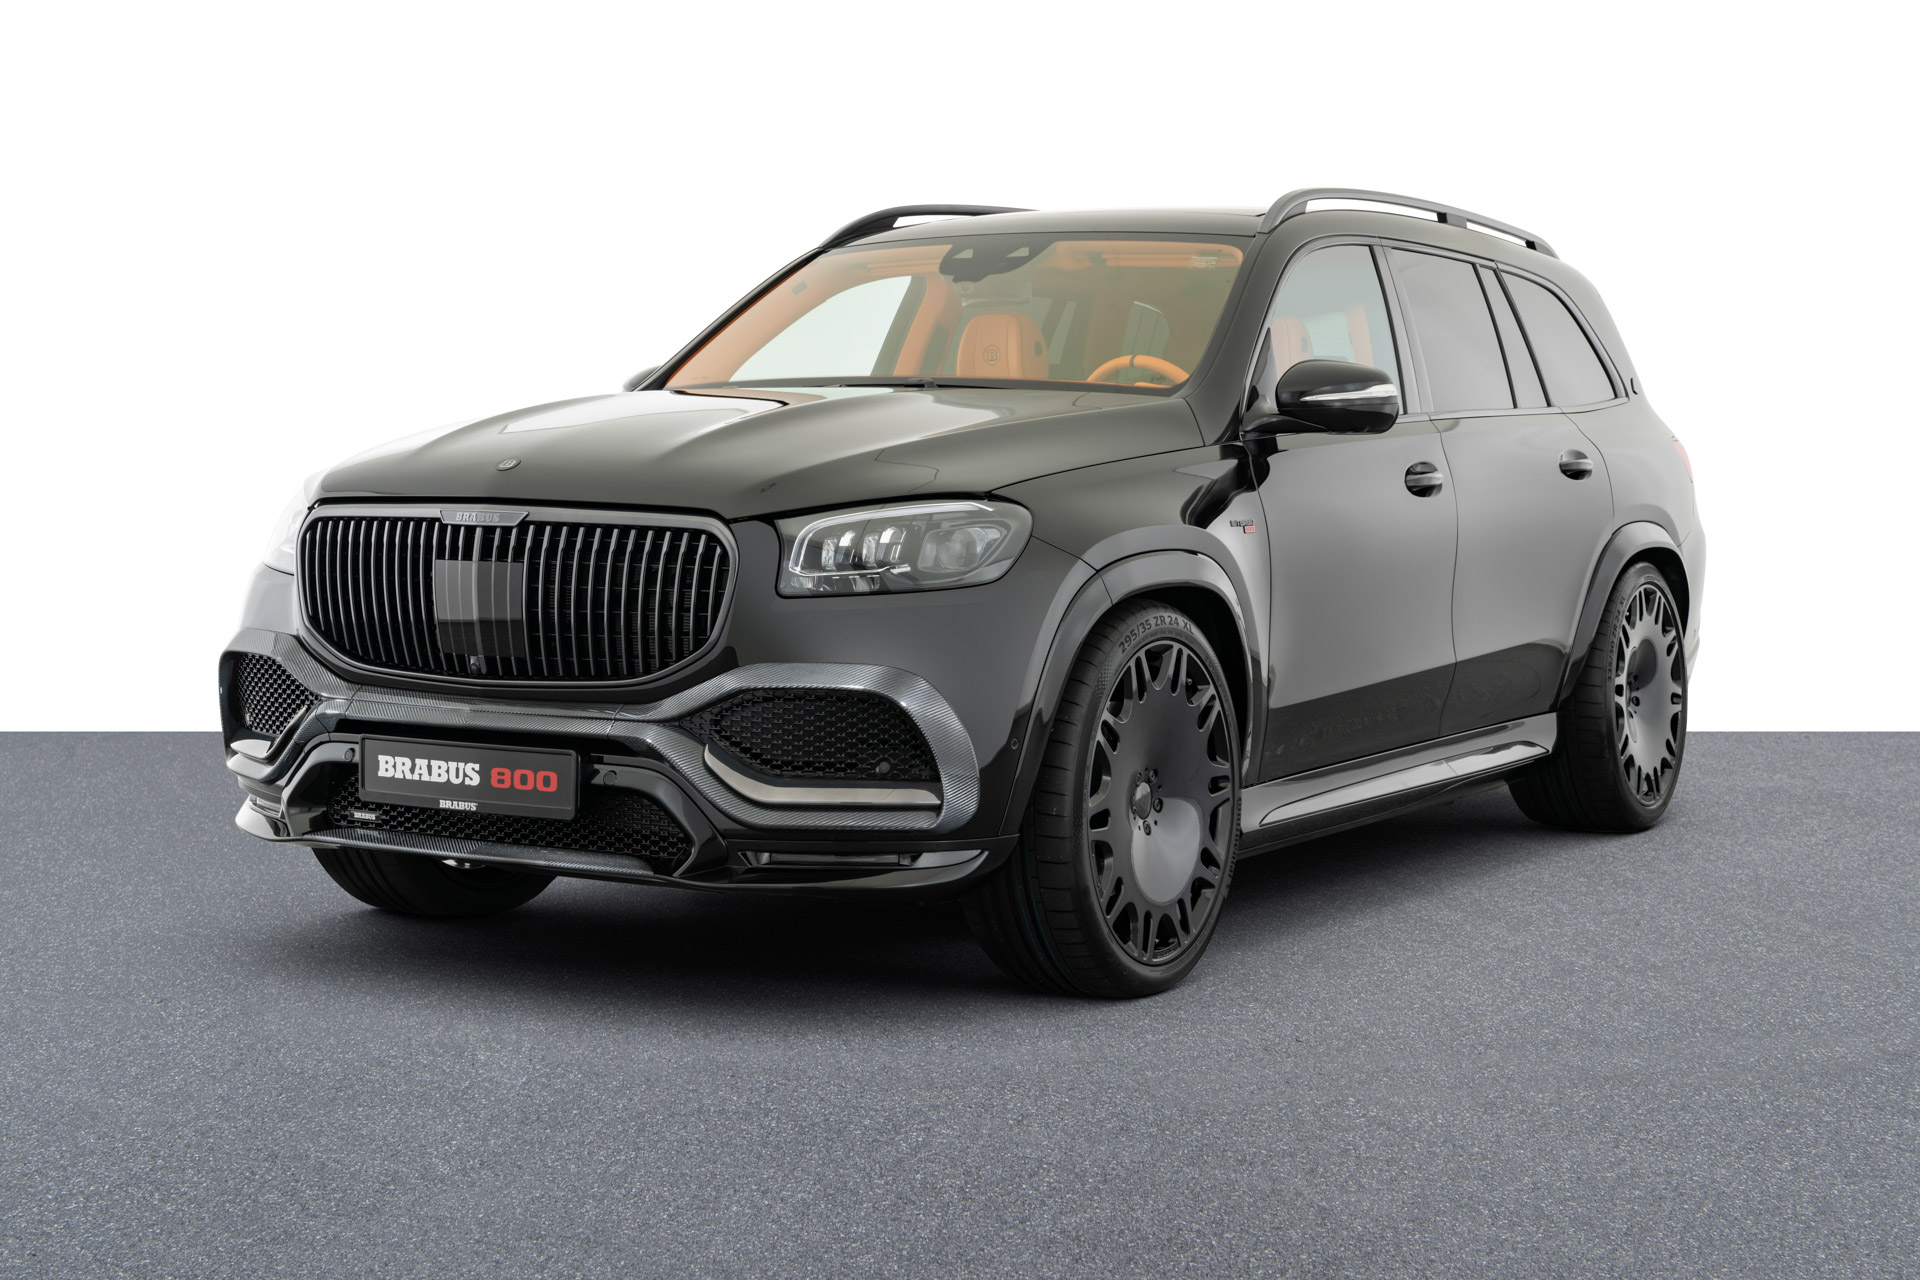 Specs and price of 2022 Mercedes-Maybach BRABUS GLS 800 in Nigeria